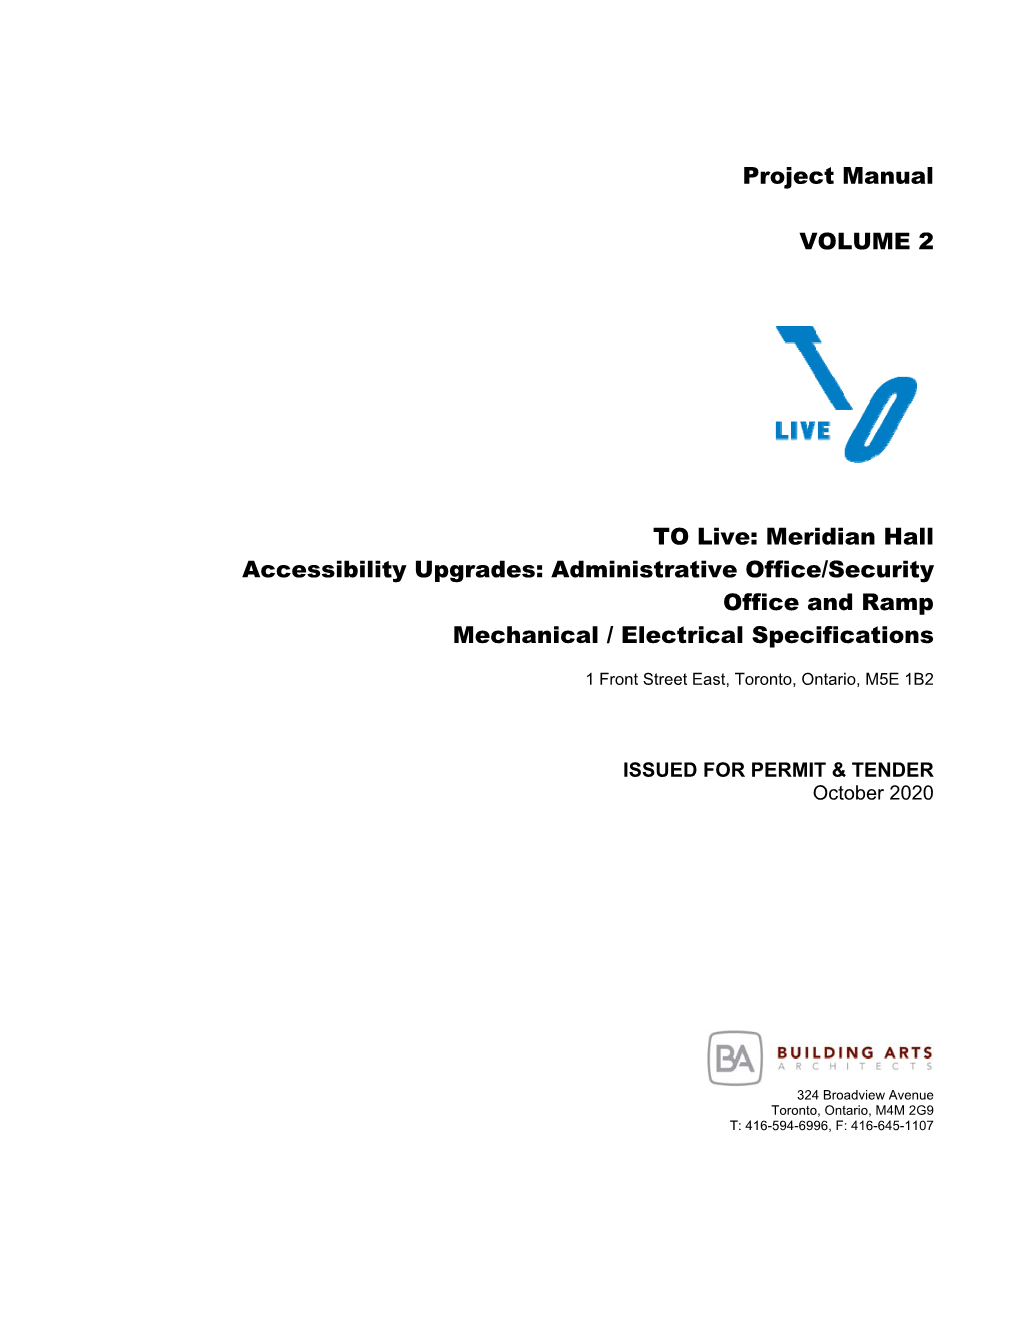 Project Manual VOLUME 2 to Live: Meridian Hall Accessibility